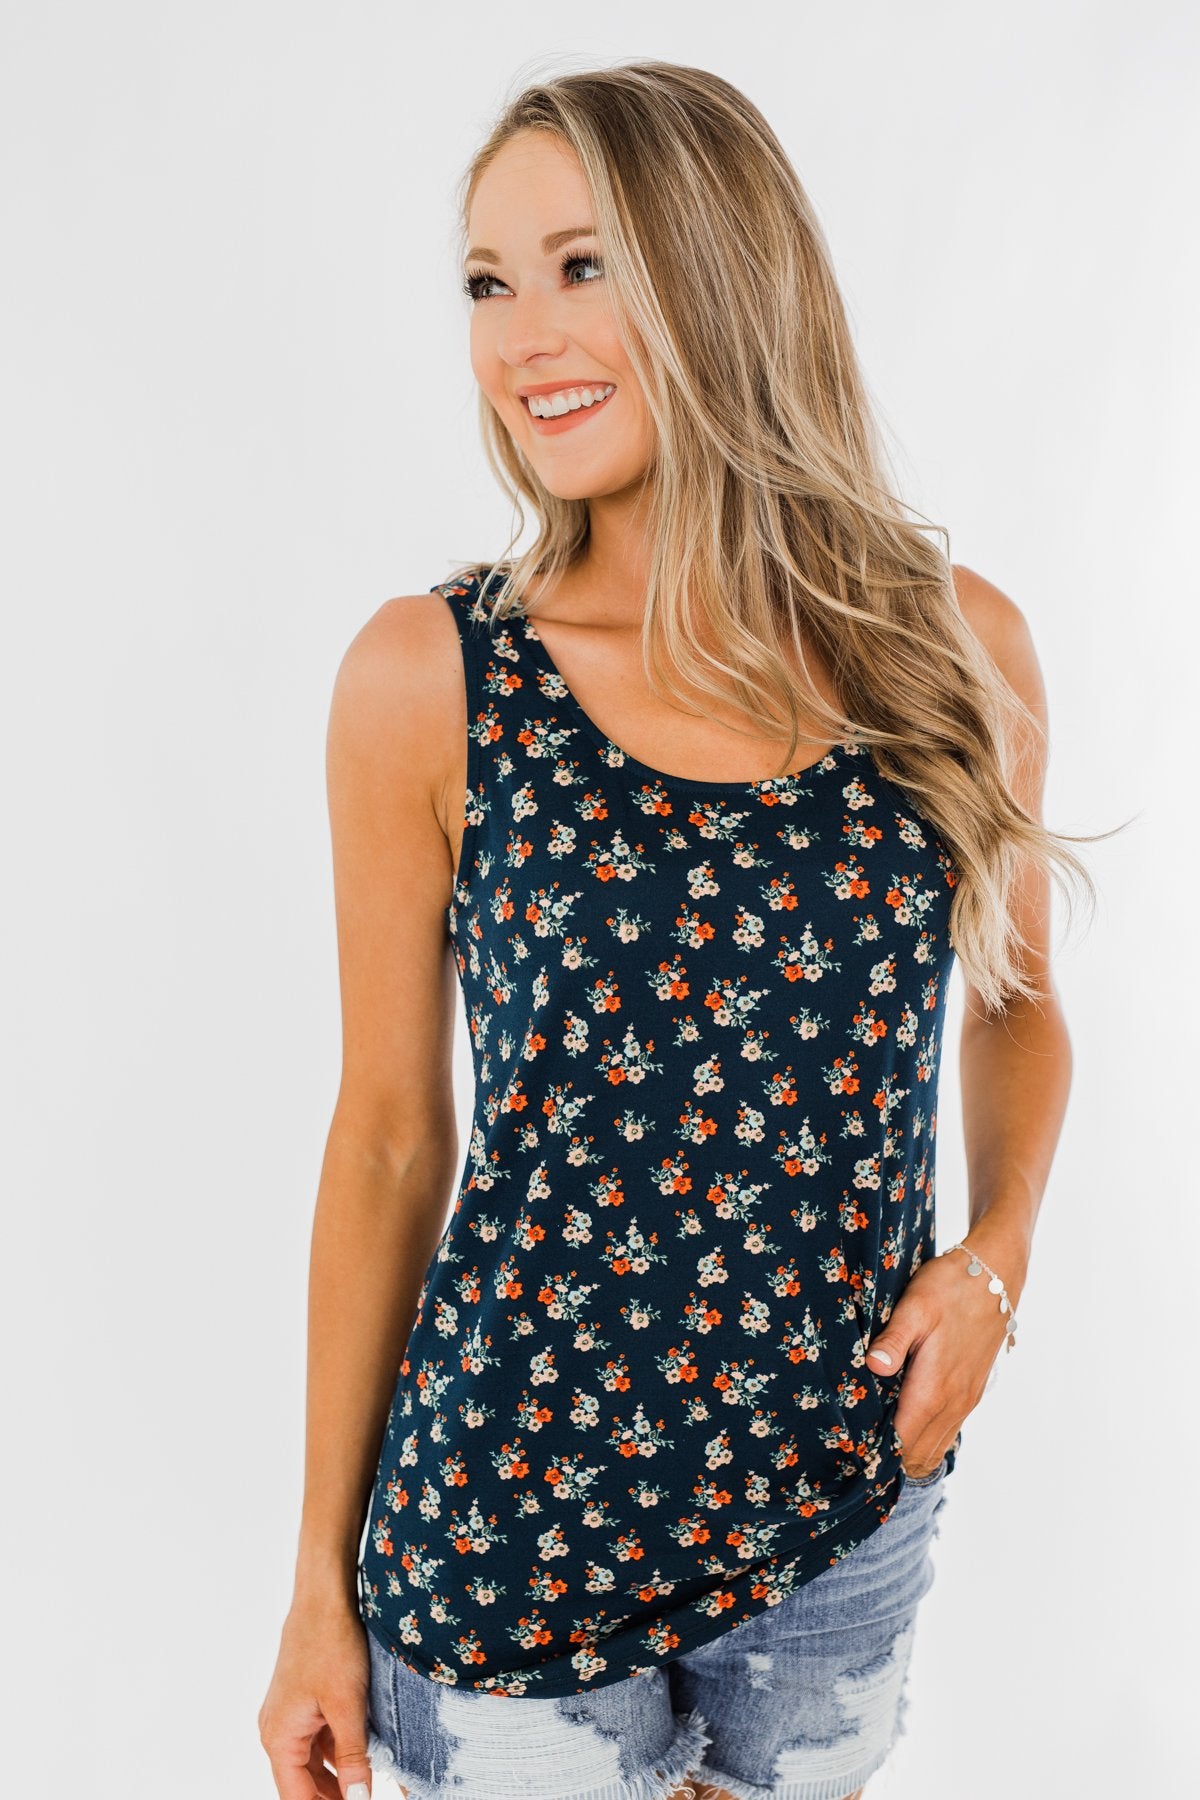 Easily Attracted Floral Tank Top Dark Teal The Pulse Boutique